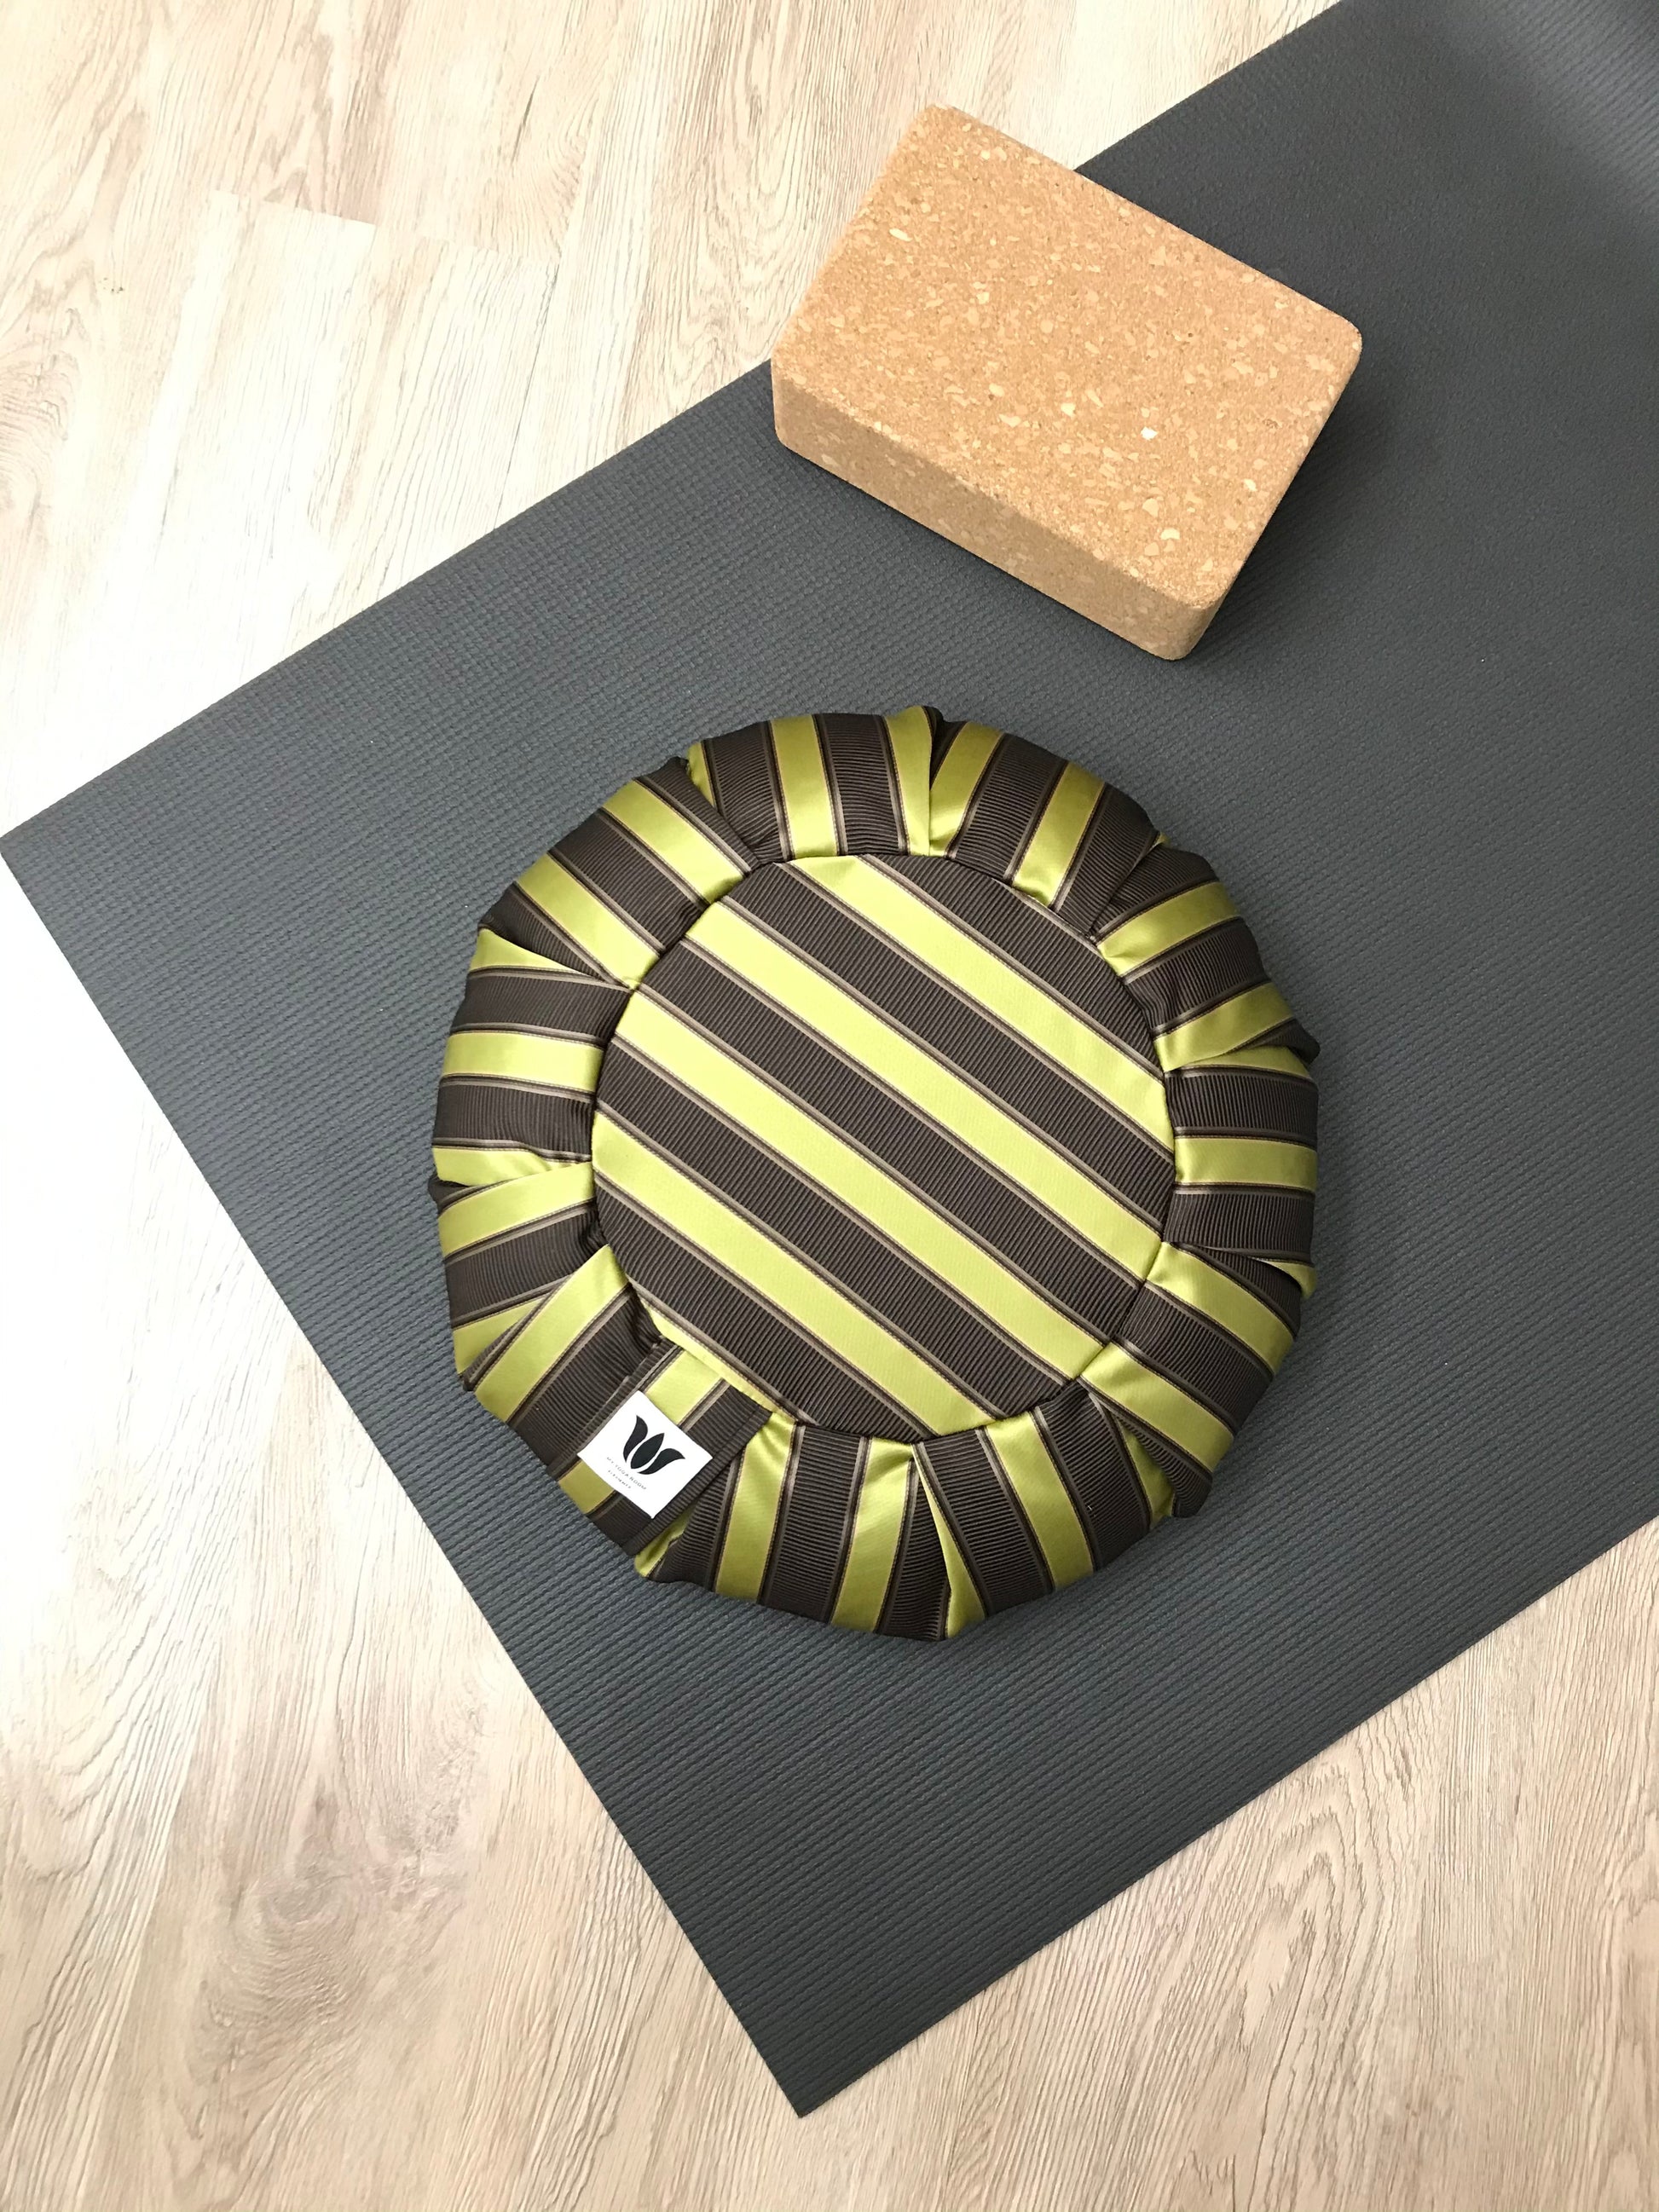 Handcrafted premium sateen home decor fabric meditation seat cushion in purple and gold-green stripe fabric. Align the spine and body in comfort to calm the monkey mind in your meditation practice. Handcrafted in Calgary, Alberta Canada